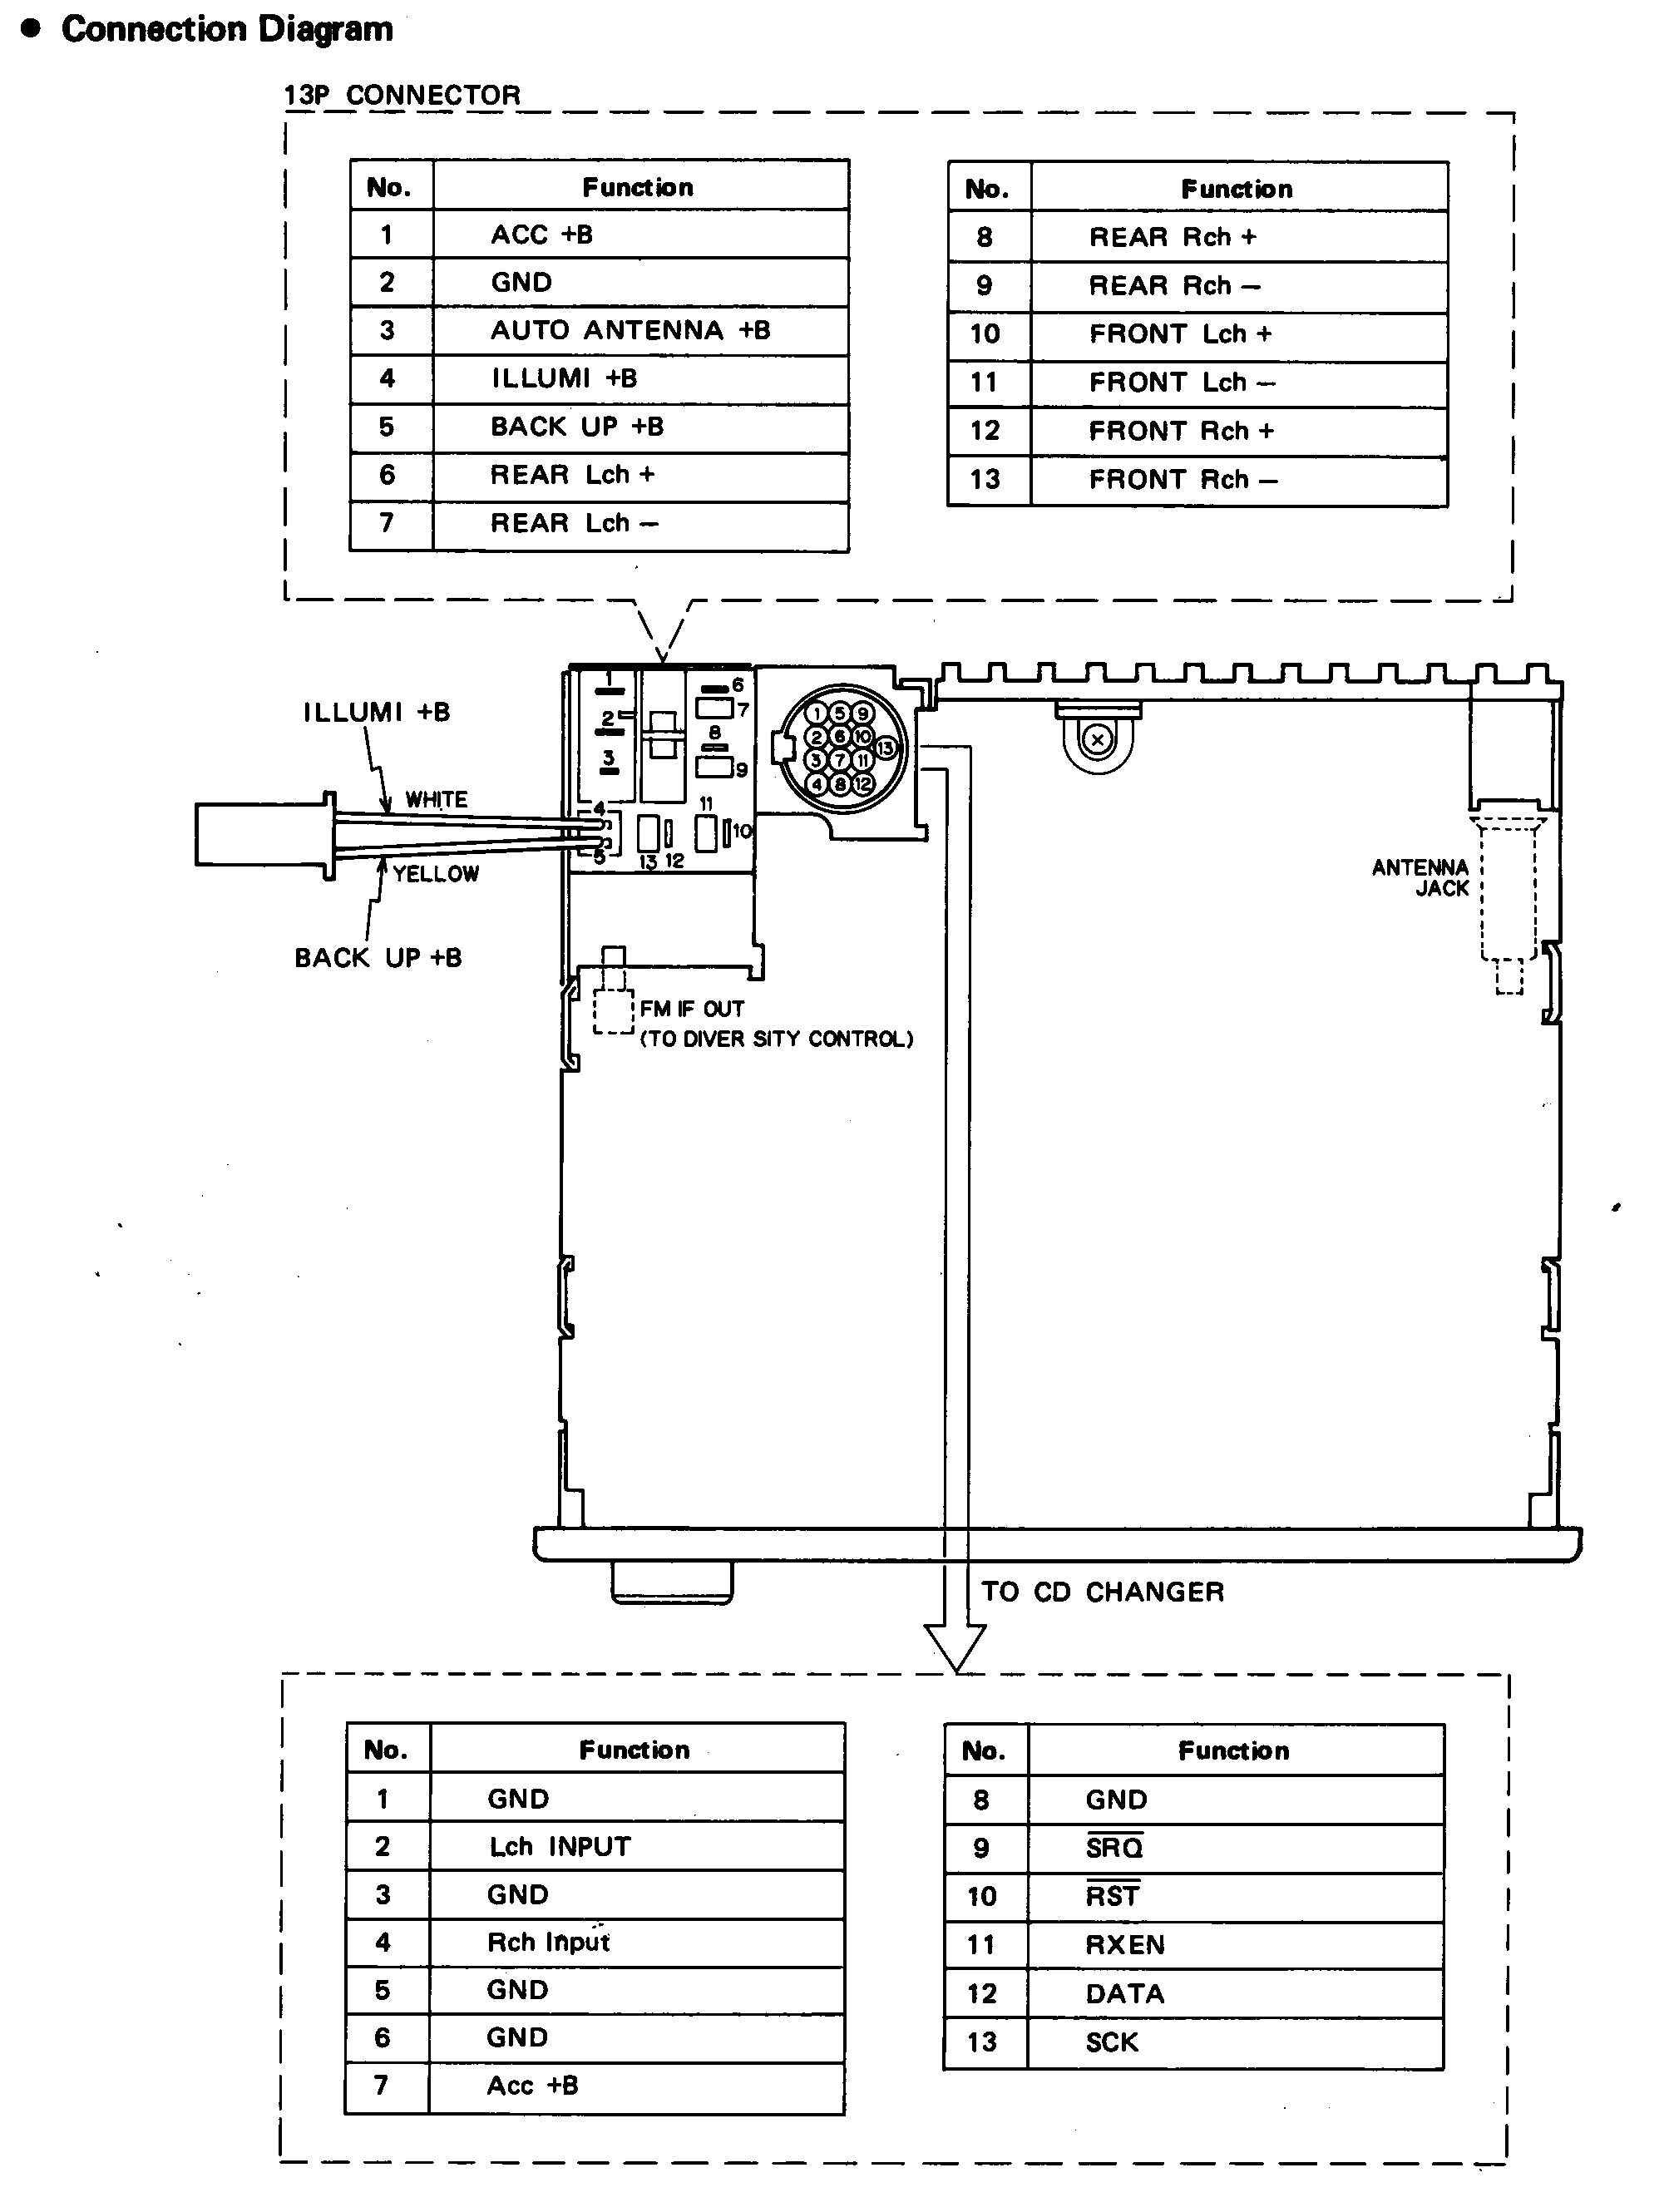 Wiring Diagram for Car Audio System Car Stereo Wiring Diagram Bmw Car Radio Stereo Audio Wiring